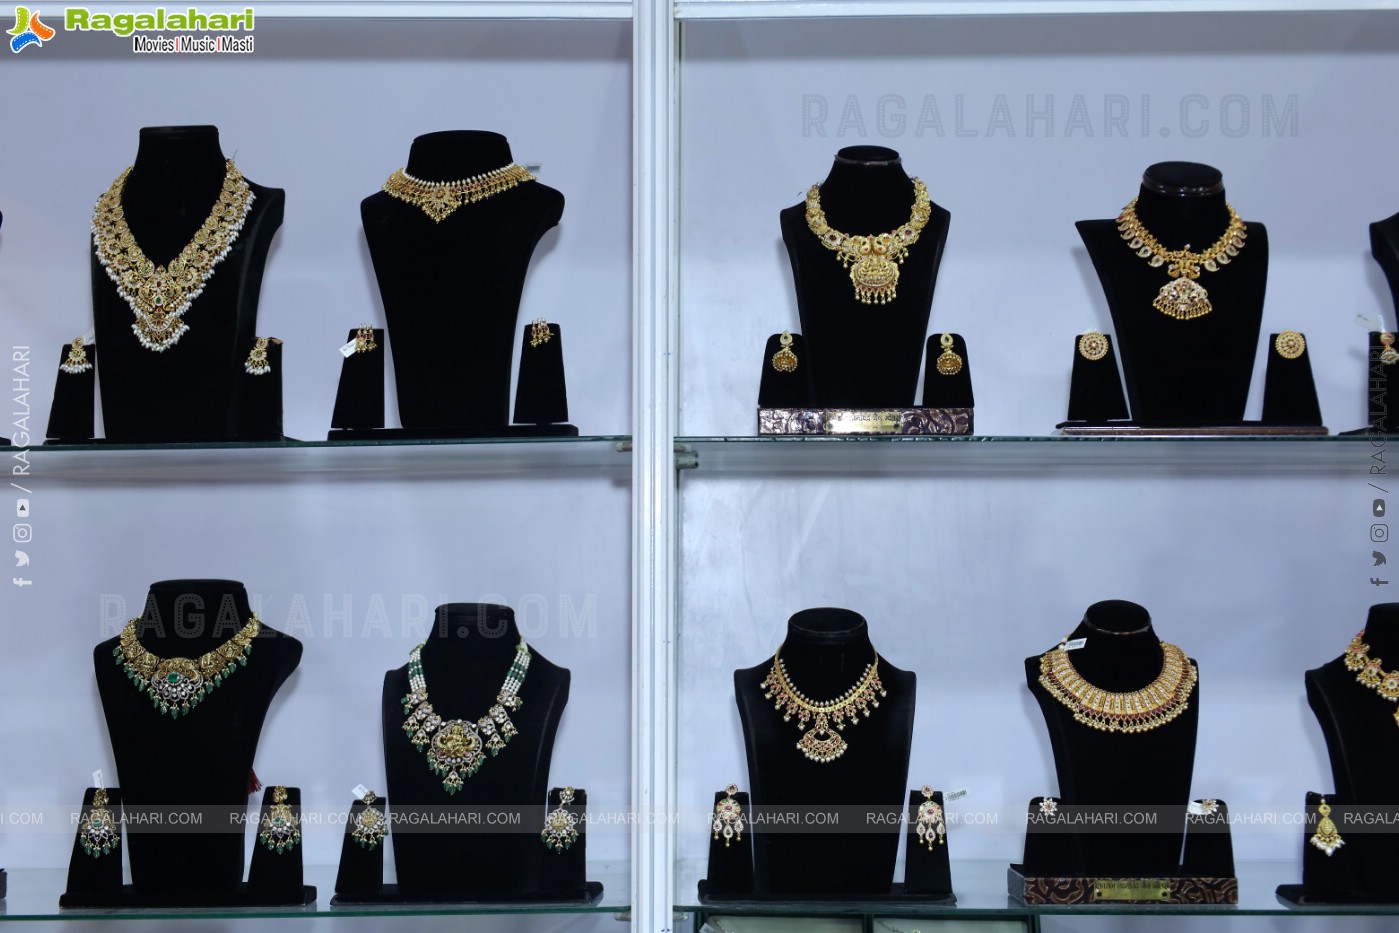 Umang 2.0: South India's biggest Jewellery and Lifestyle Exhibition at Hitex